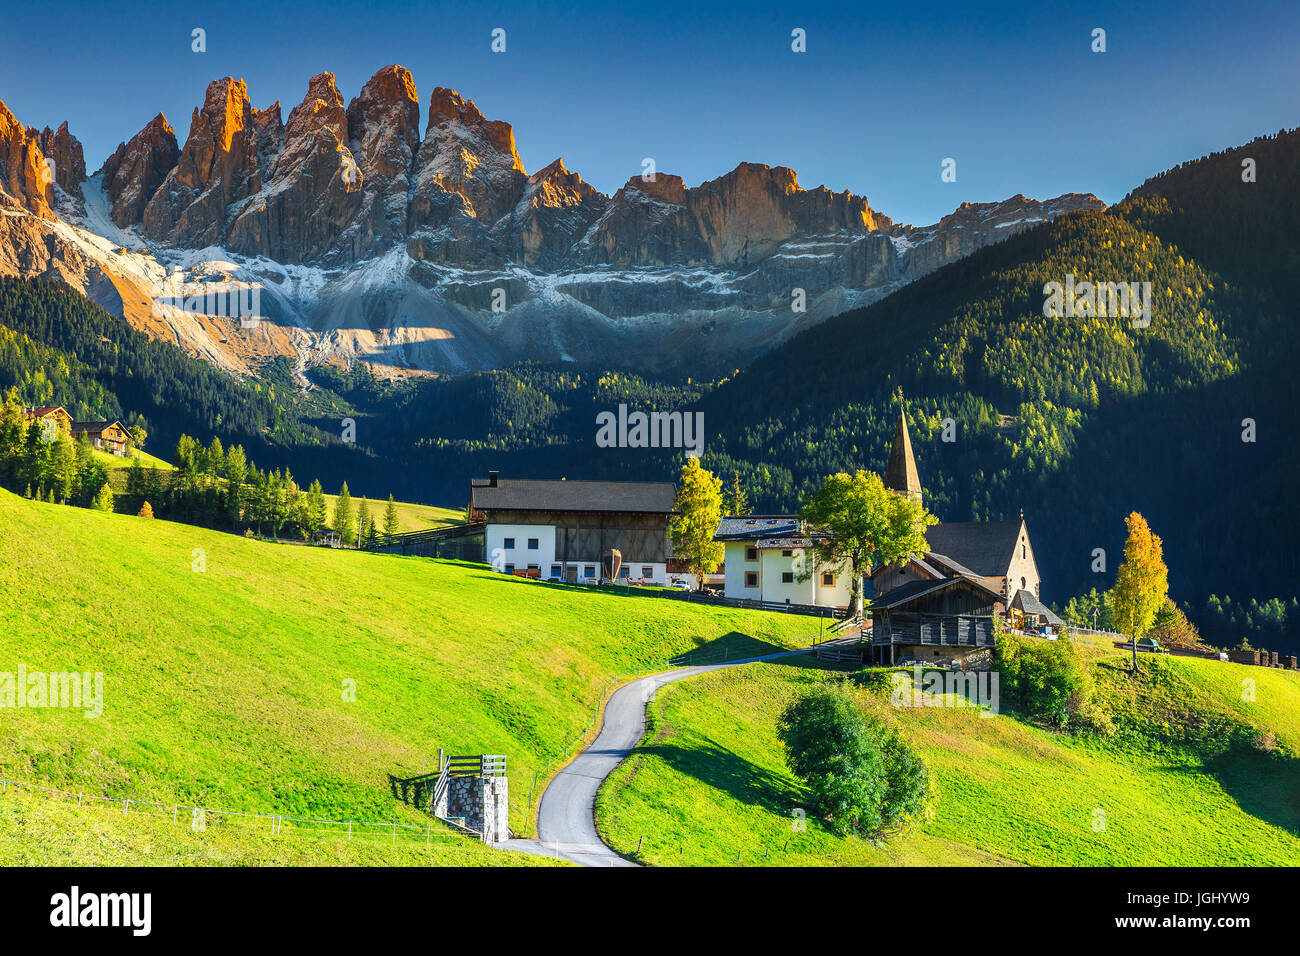 Fabulous best alpine place of the world, Santa Maddalena village with magical Dolomites mountains in background, Val di Funes valley, Trentino Alto Ad Stock Photo